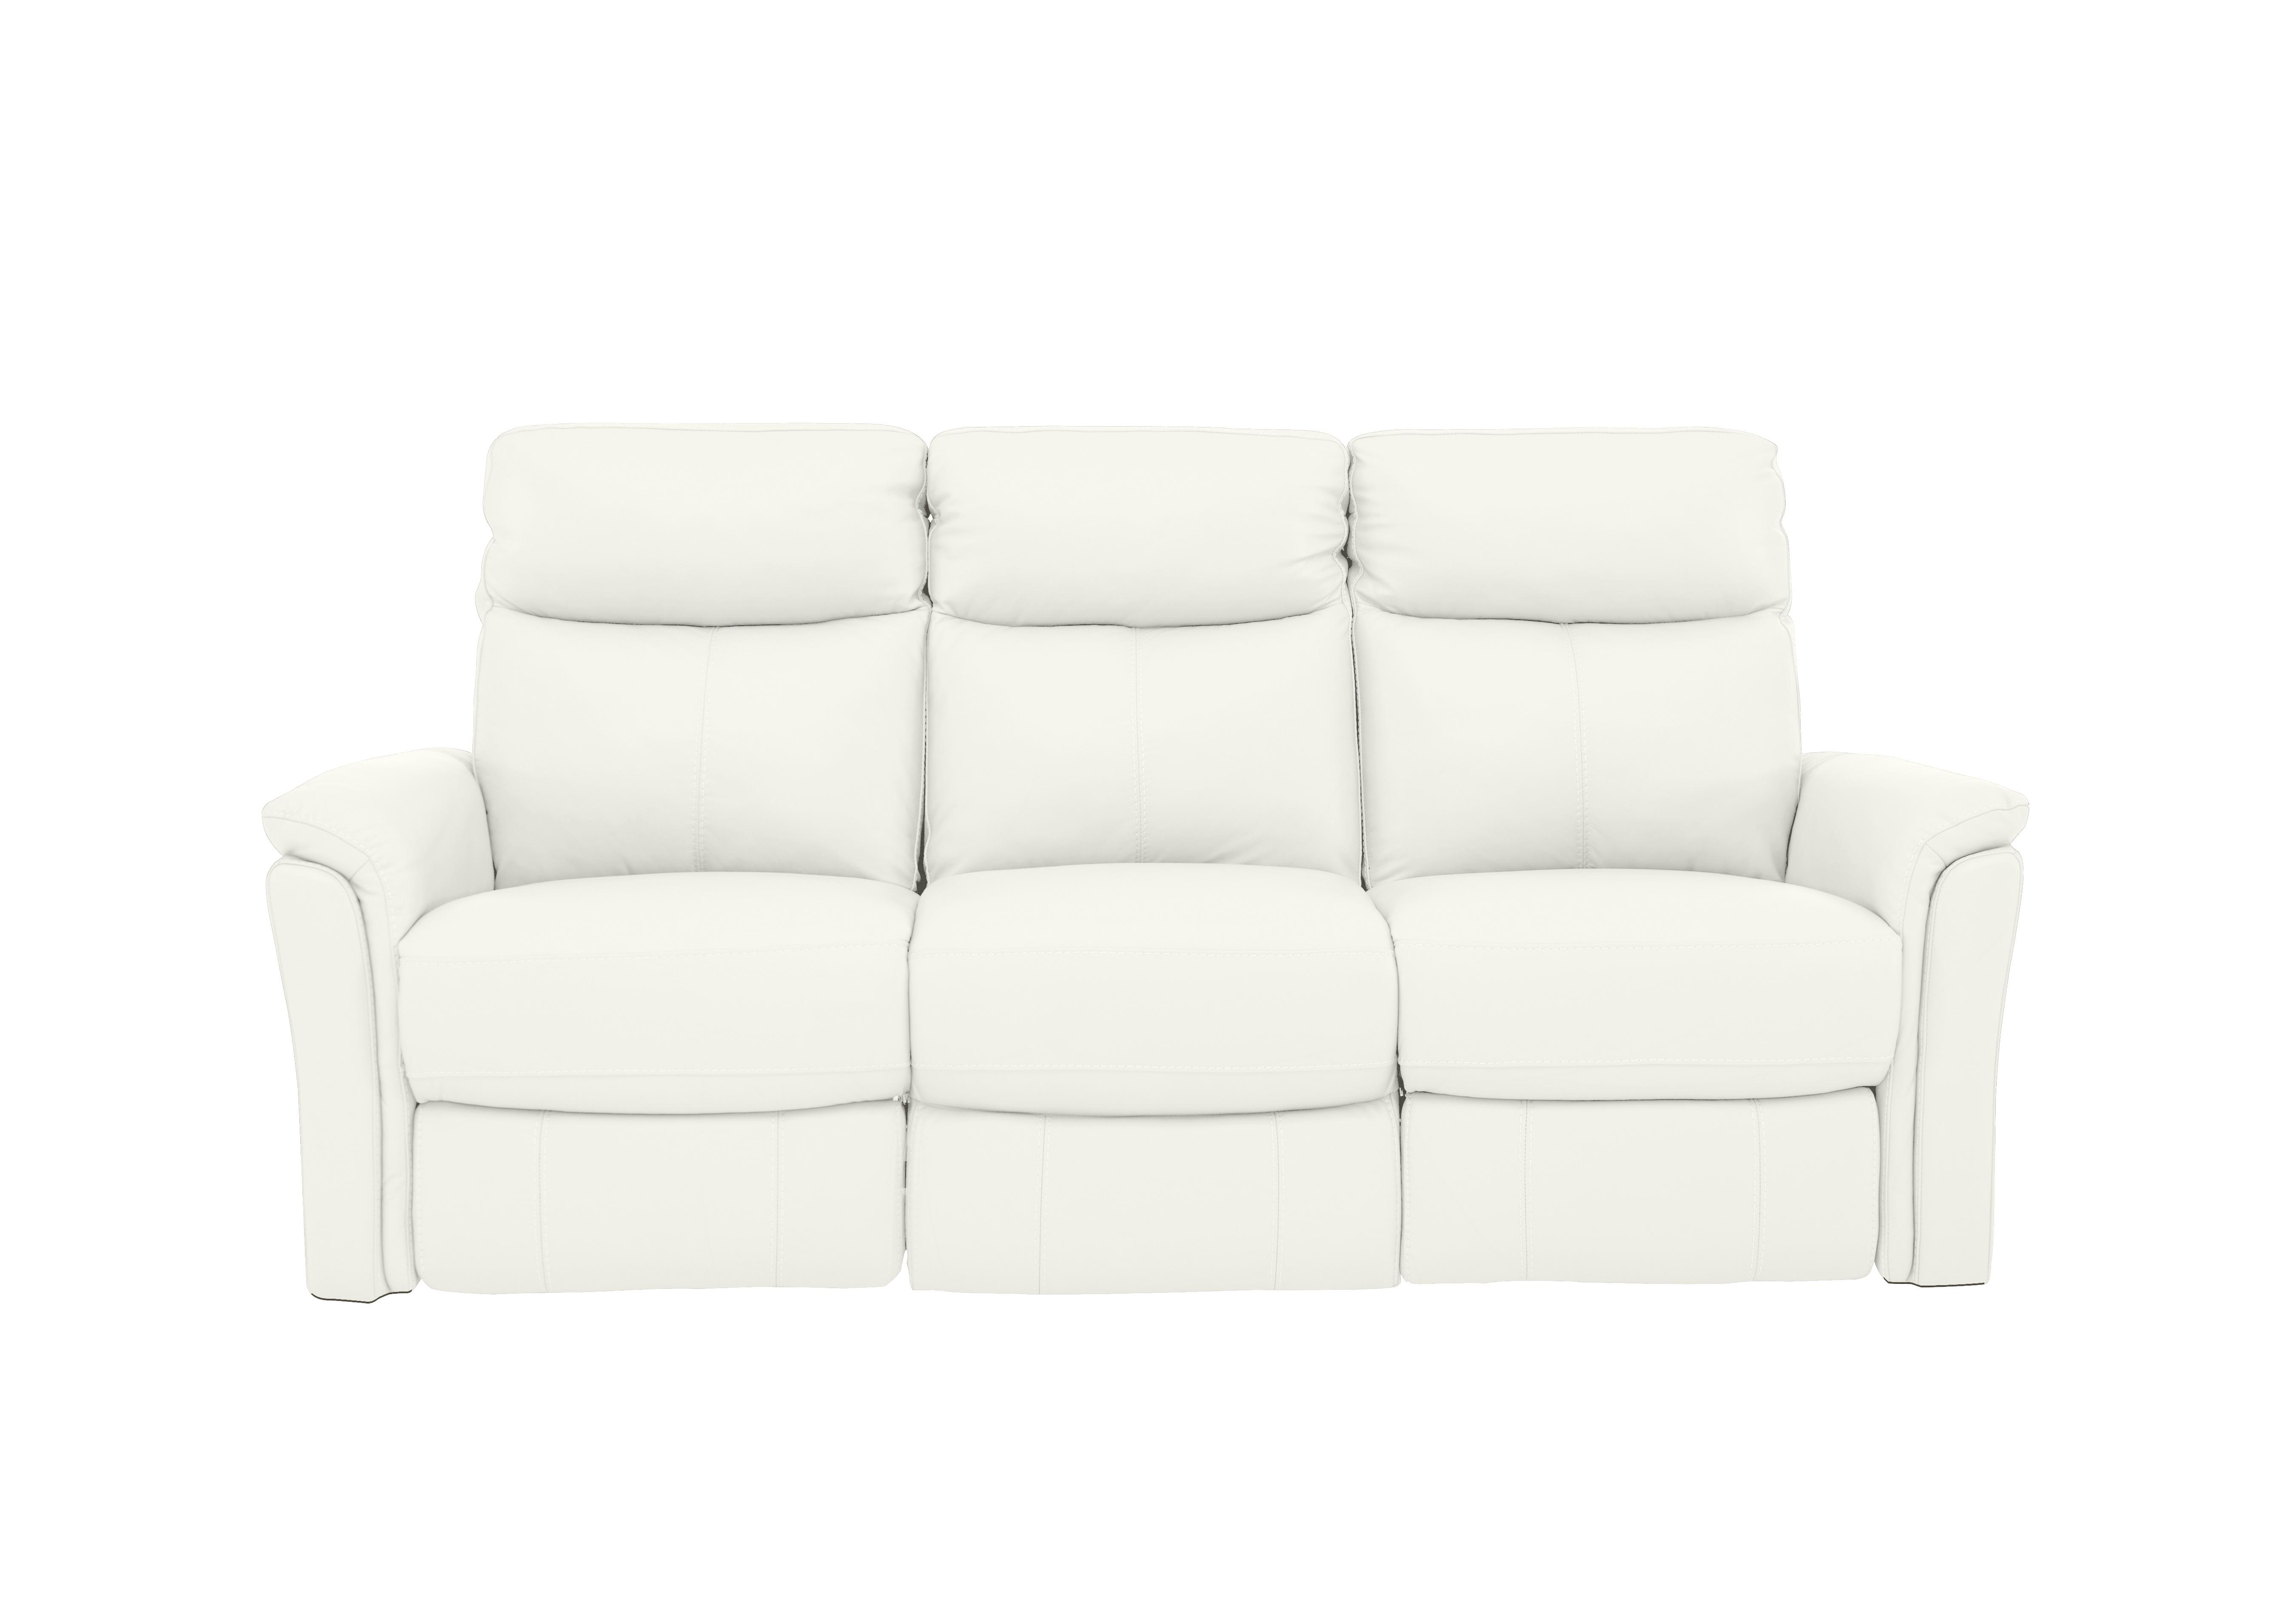 Compact Collection Piccolo 3 Seater Sofa in Bv-744d Star White on Furniture Village